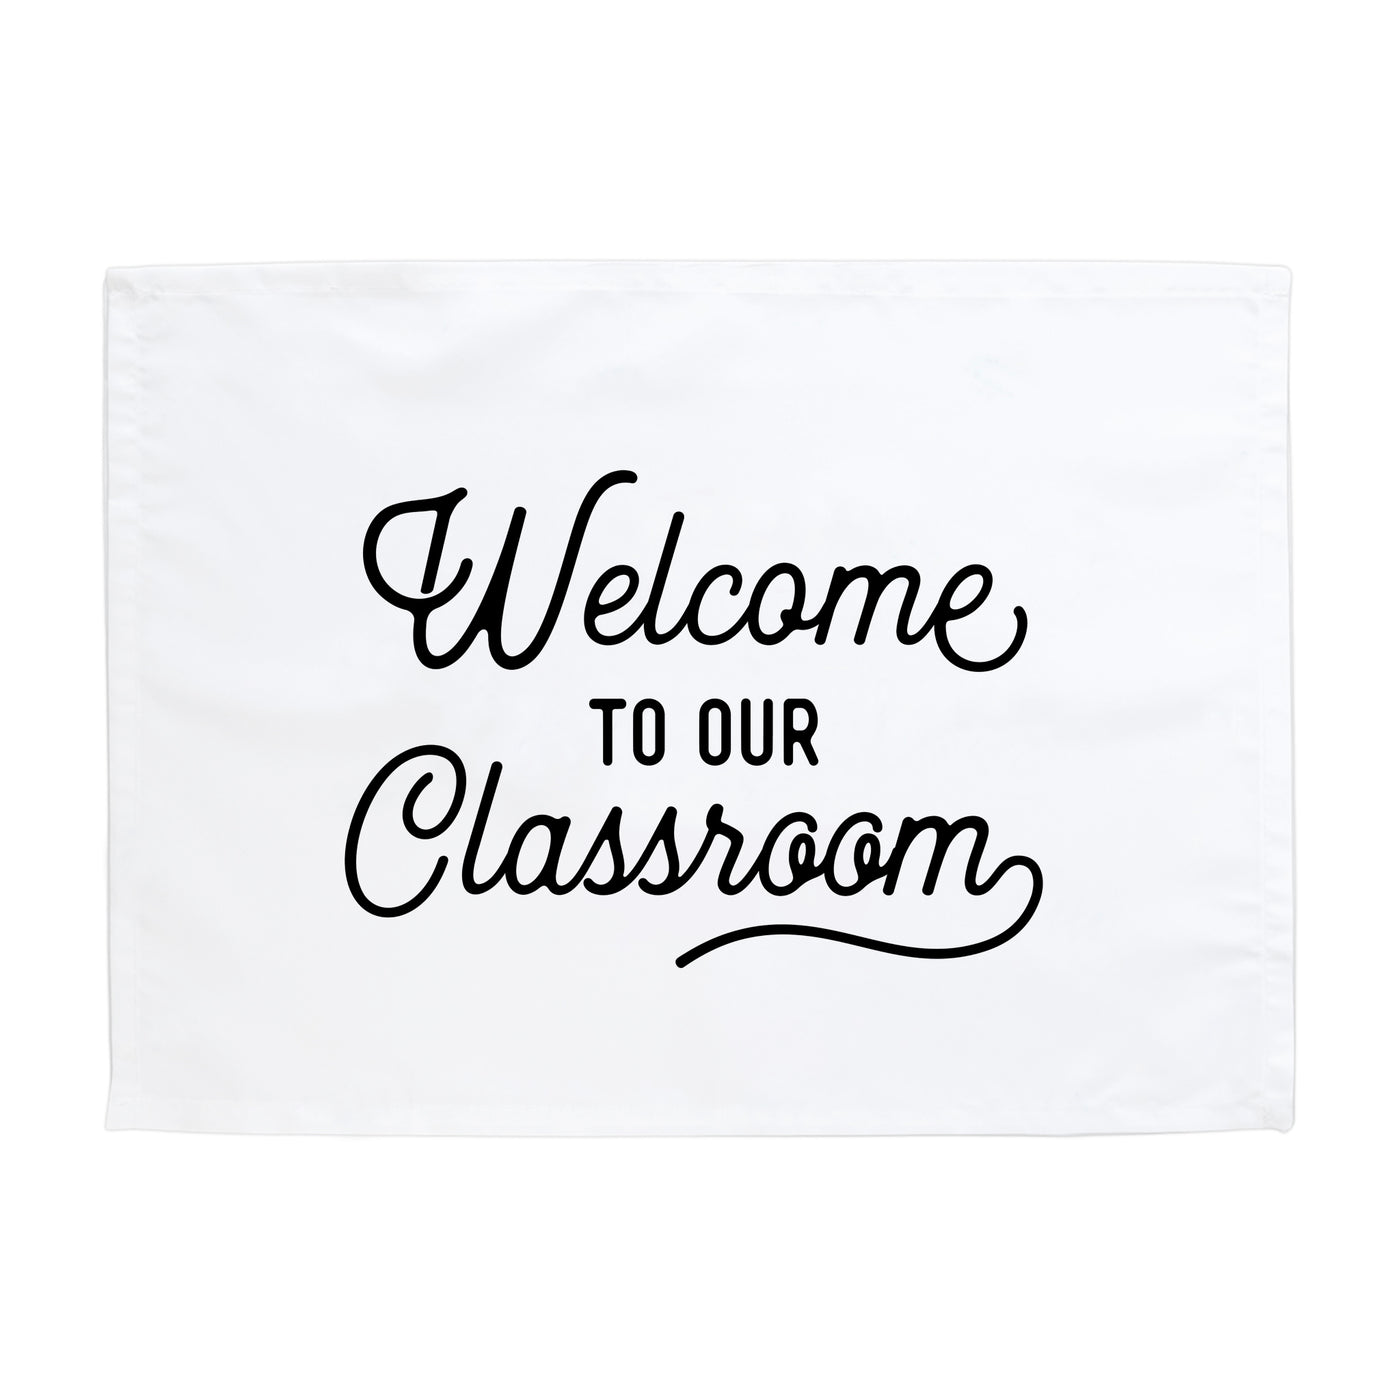 Welcome to Our Classroom Banner